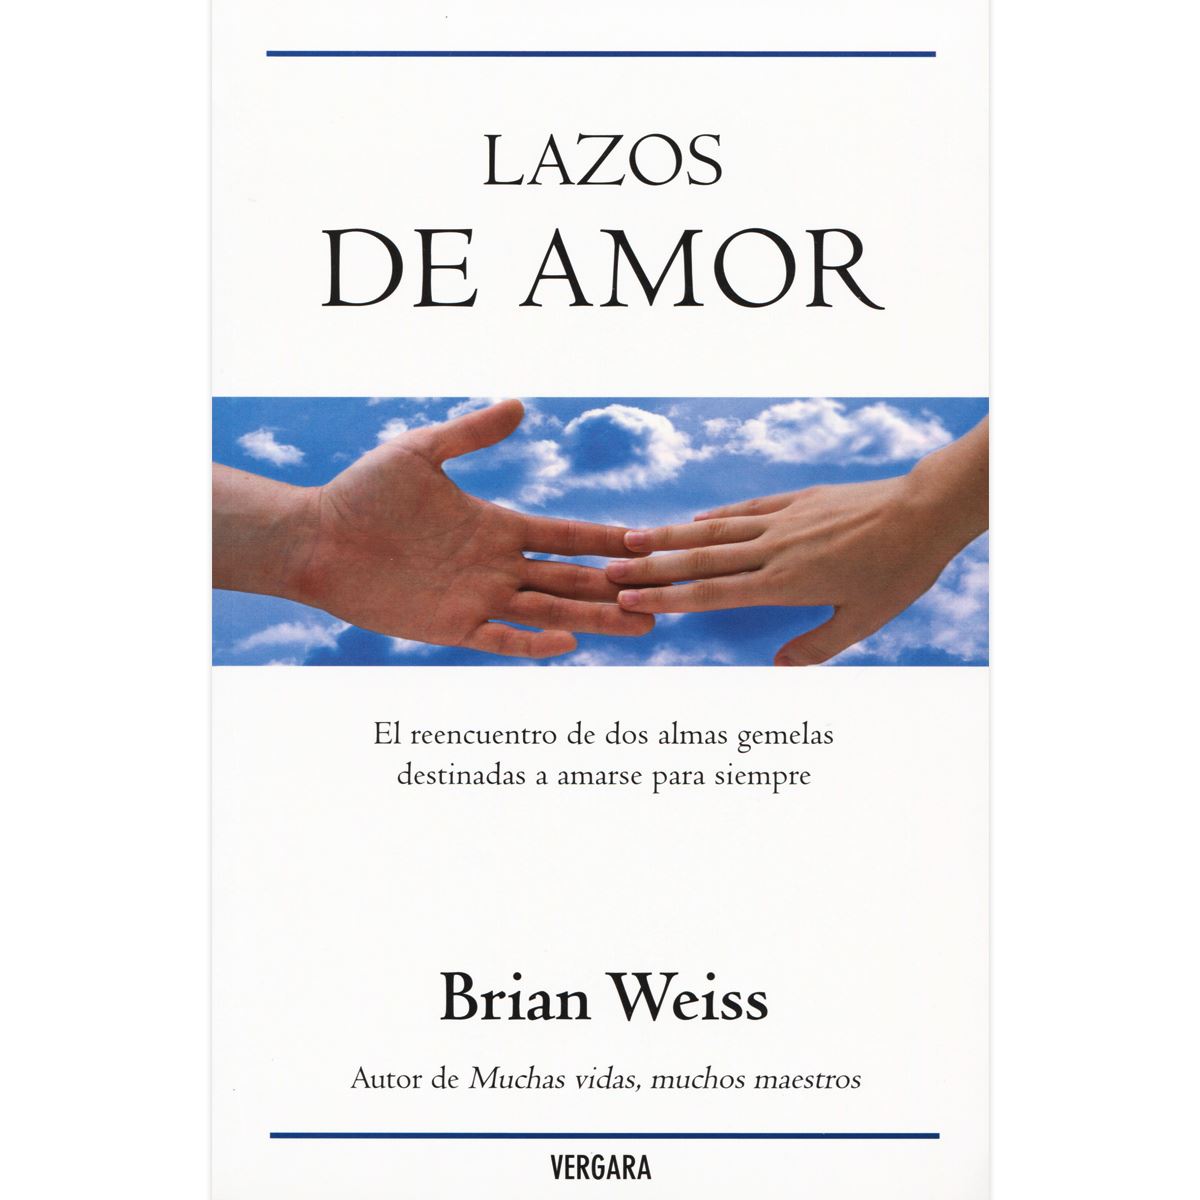 Paquete Brian Weiss